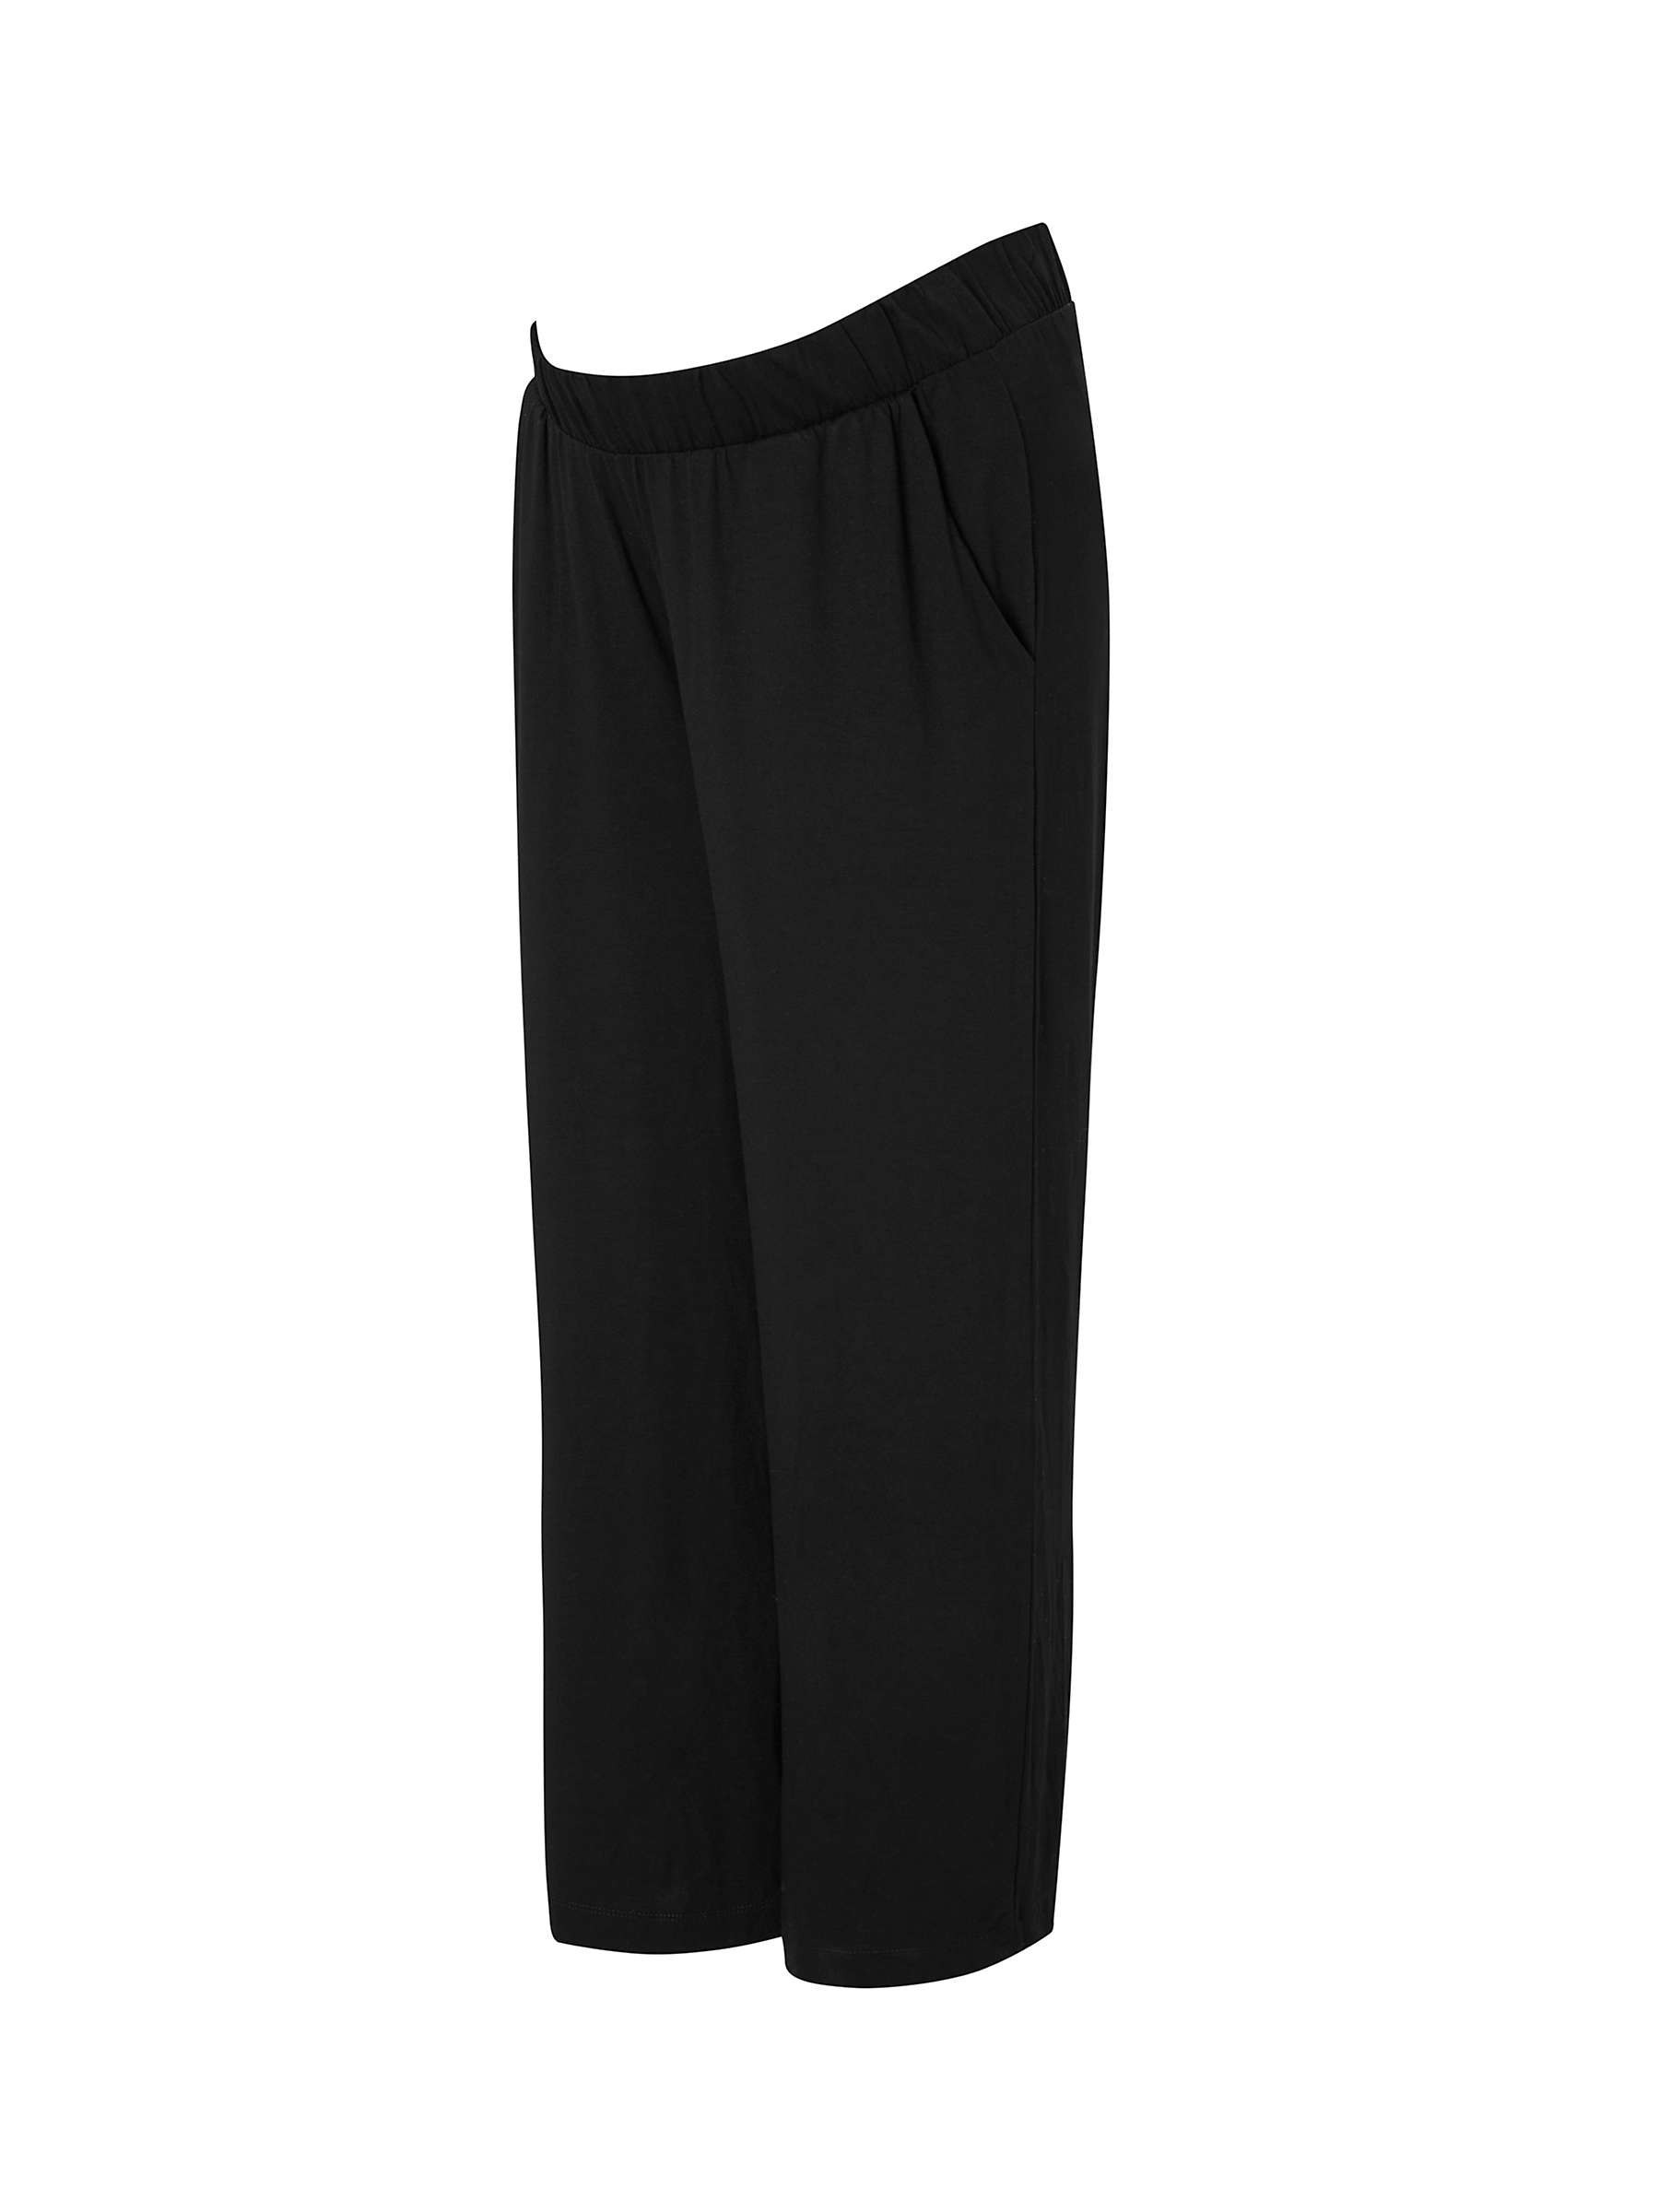 Buy Isabella Oliver Bethany Maternity Trousers, Caviar Black Online at johnlewis.com